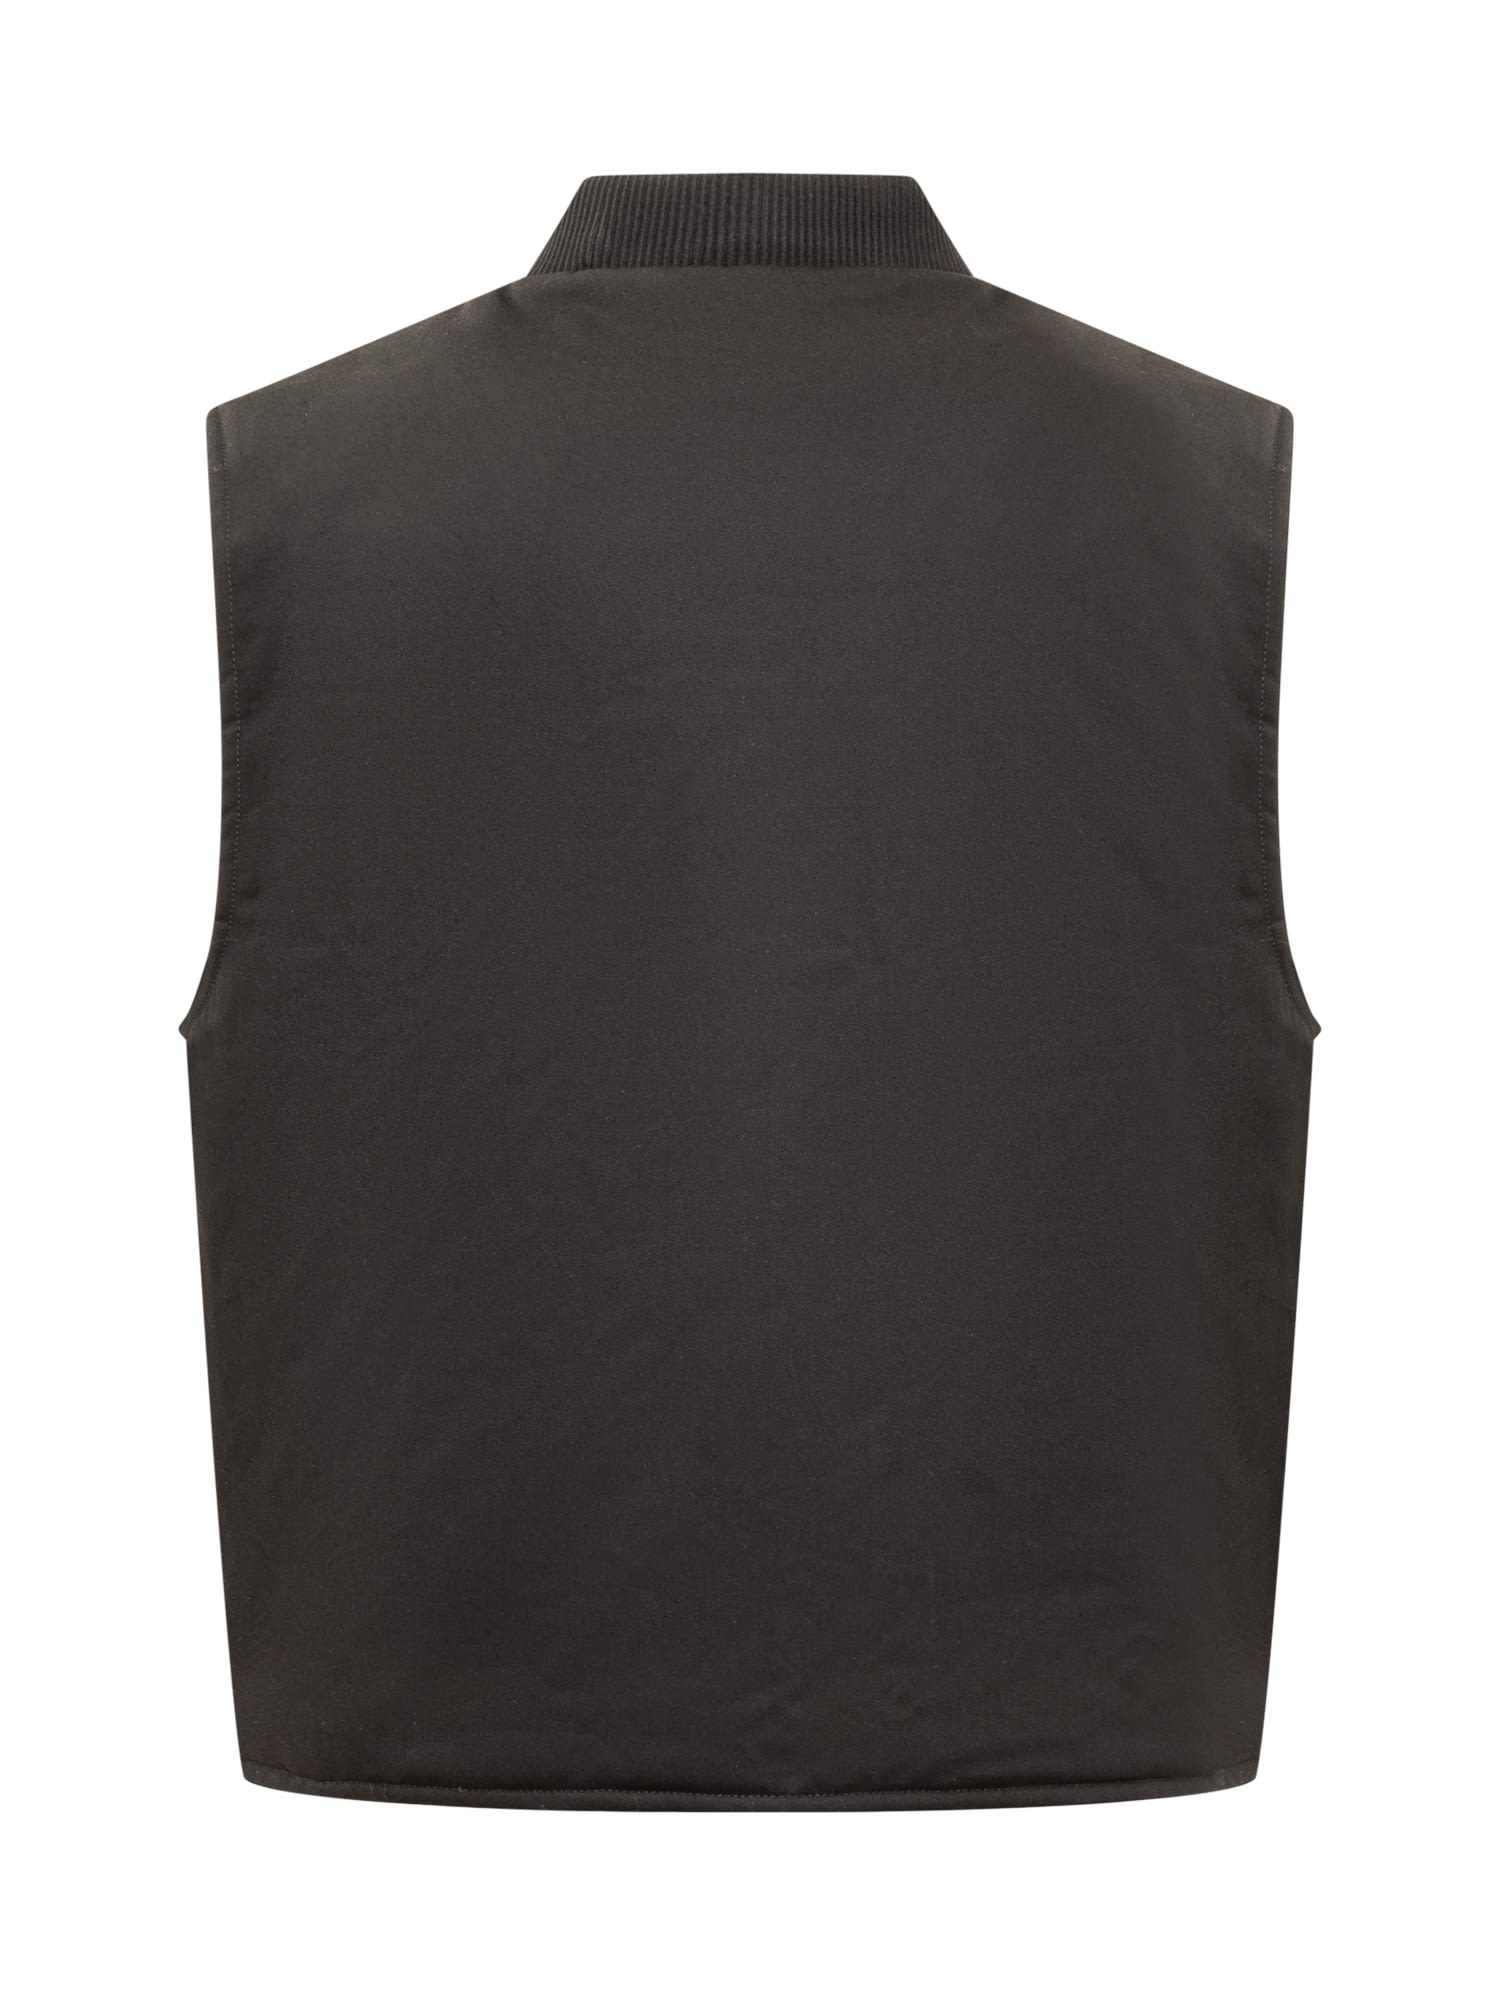 Shop Palm Angels Sleeveless Jacket In Black Off